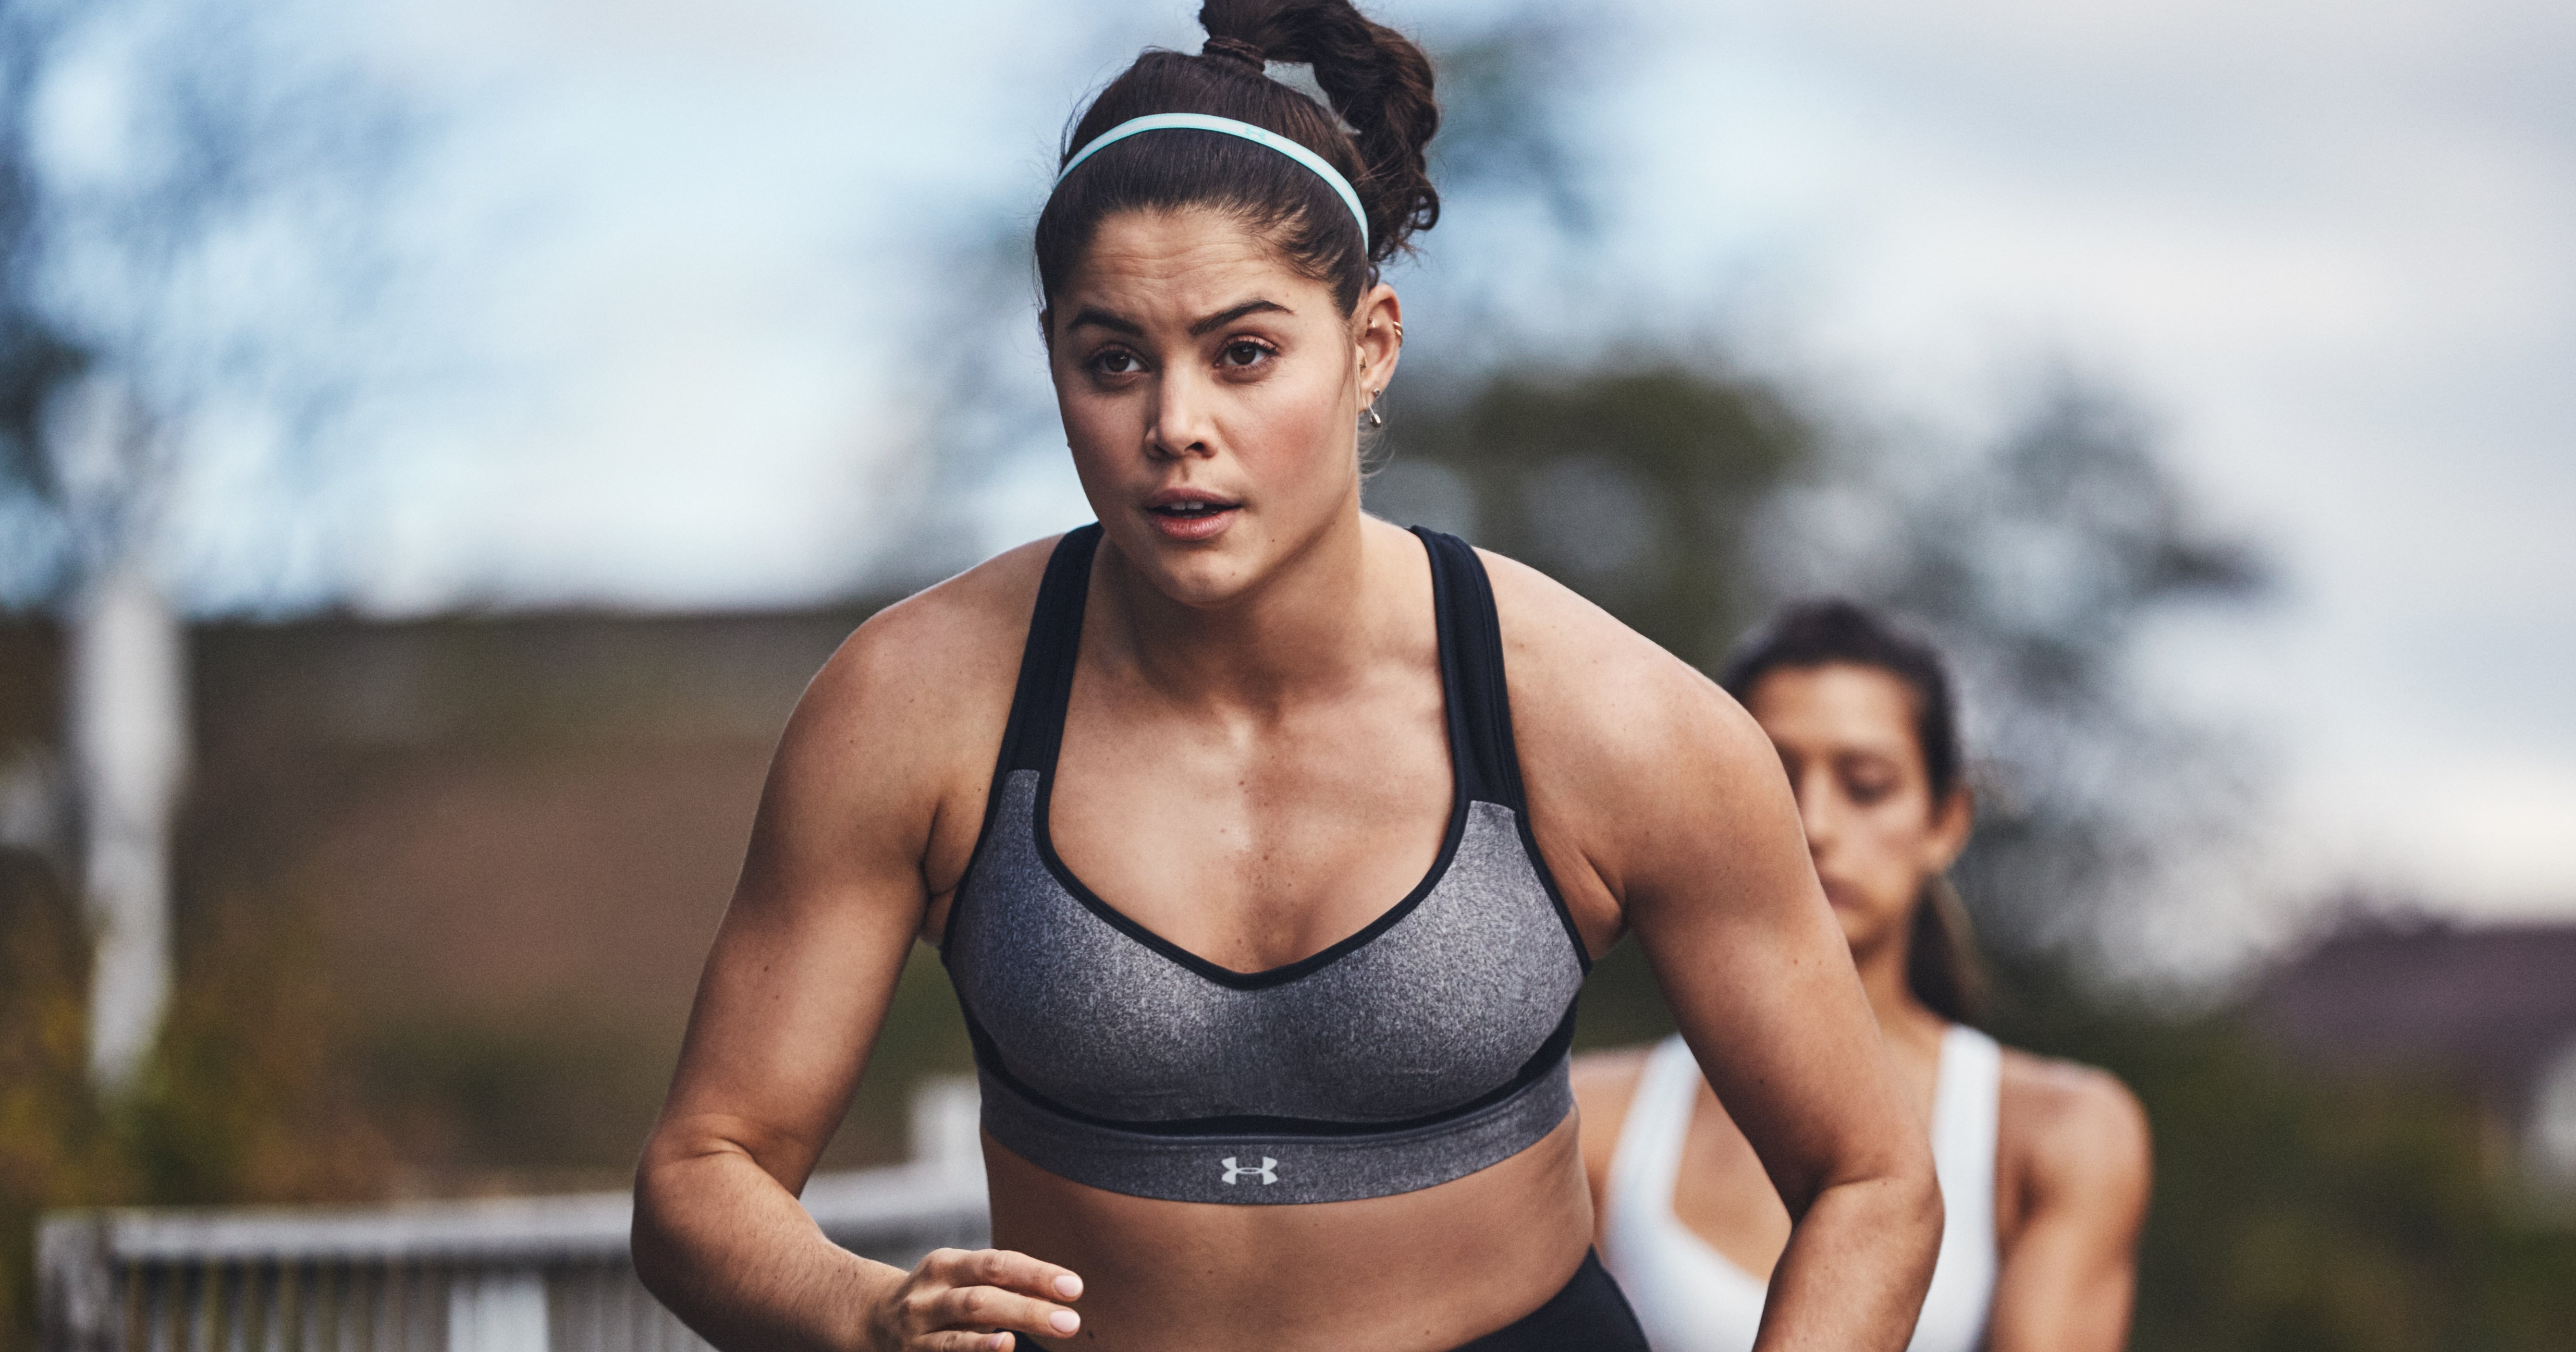 High support sports bra for women Under Armour RUSH™ - Sports bras